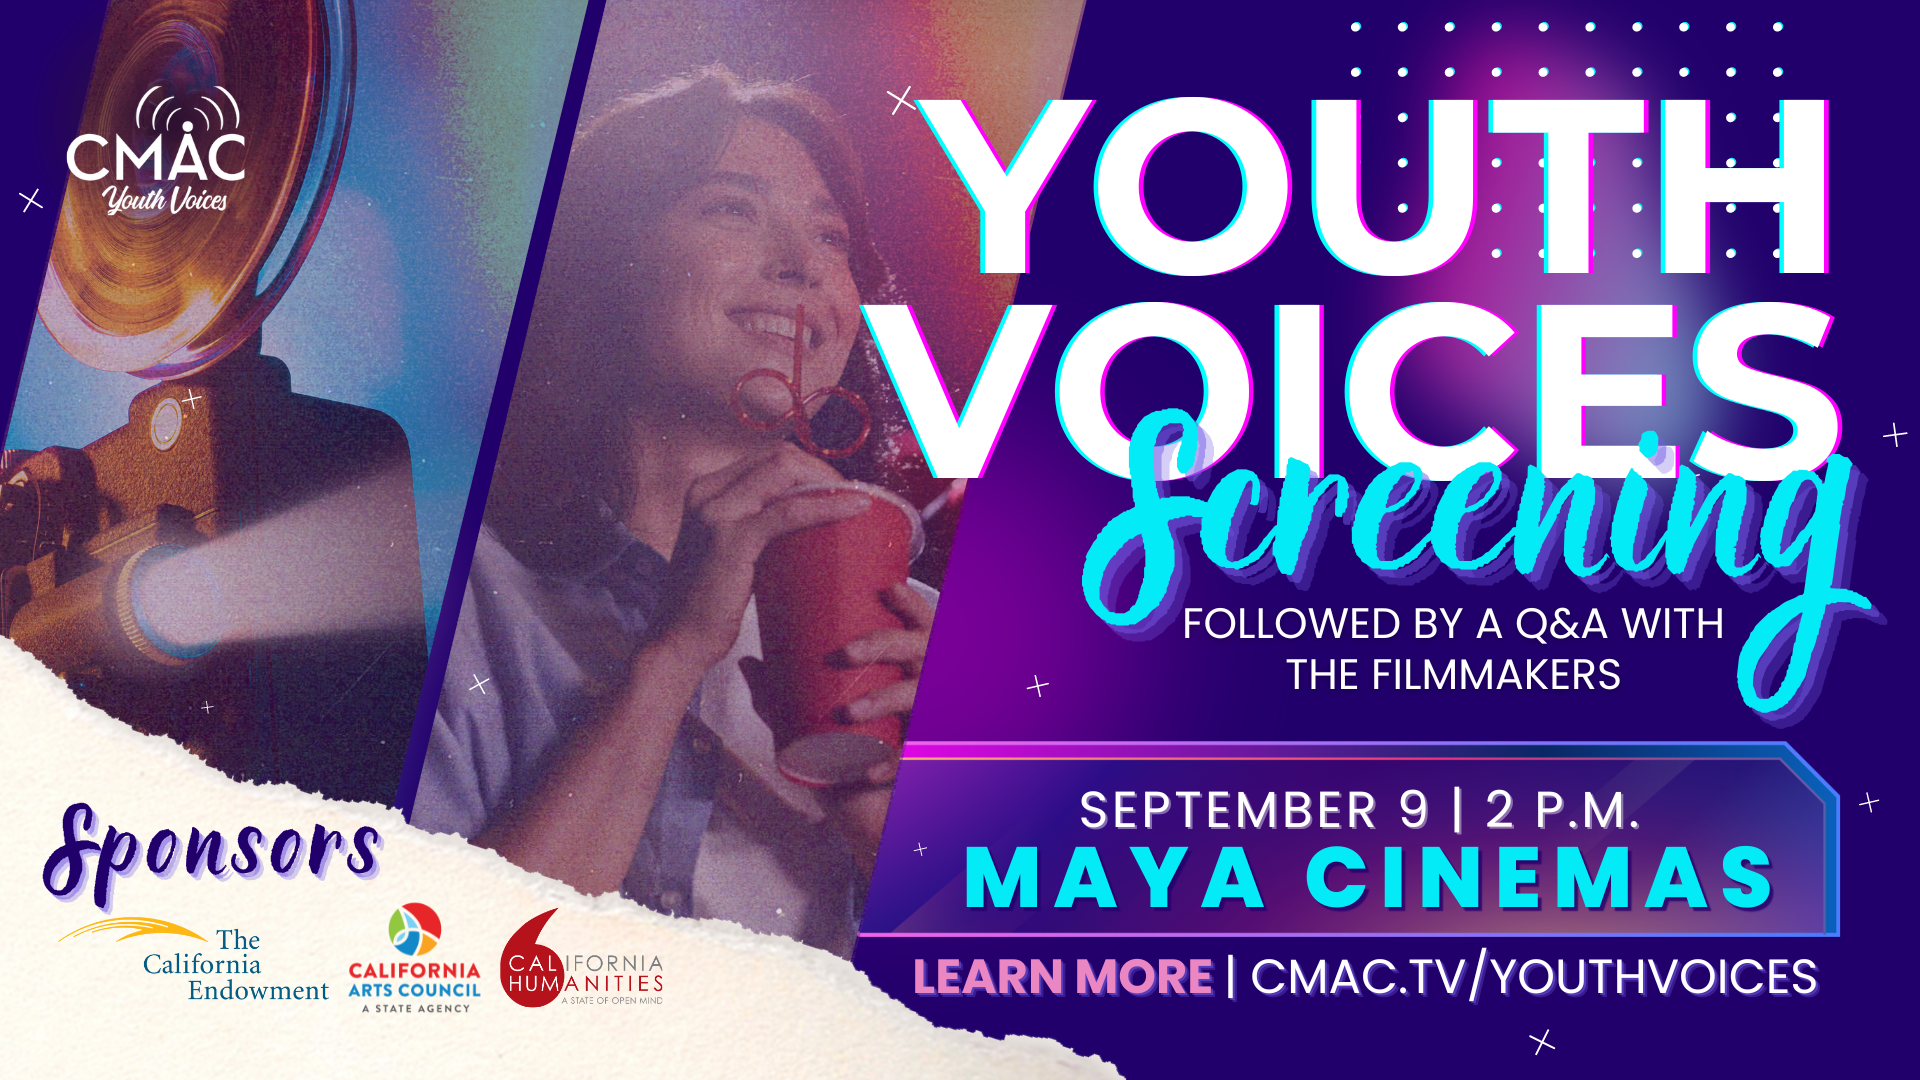 Youth Voices screening promo image showing a woman watching a film drinking from a cup with a straw, sponsor logos, and location info.